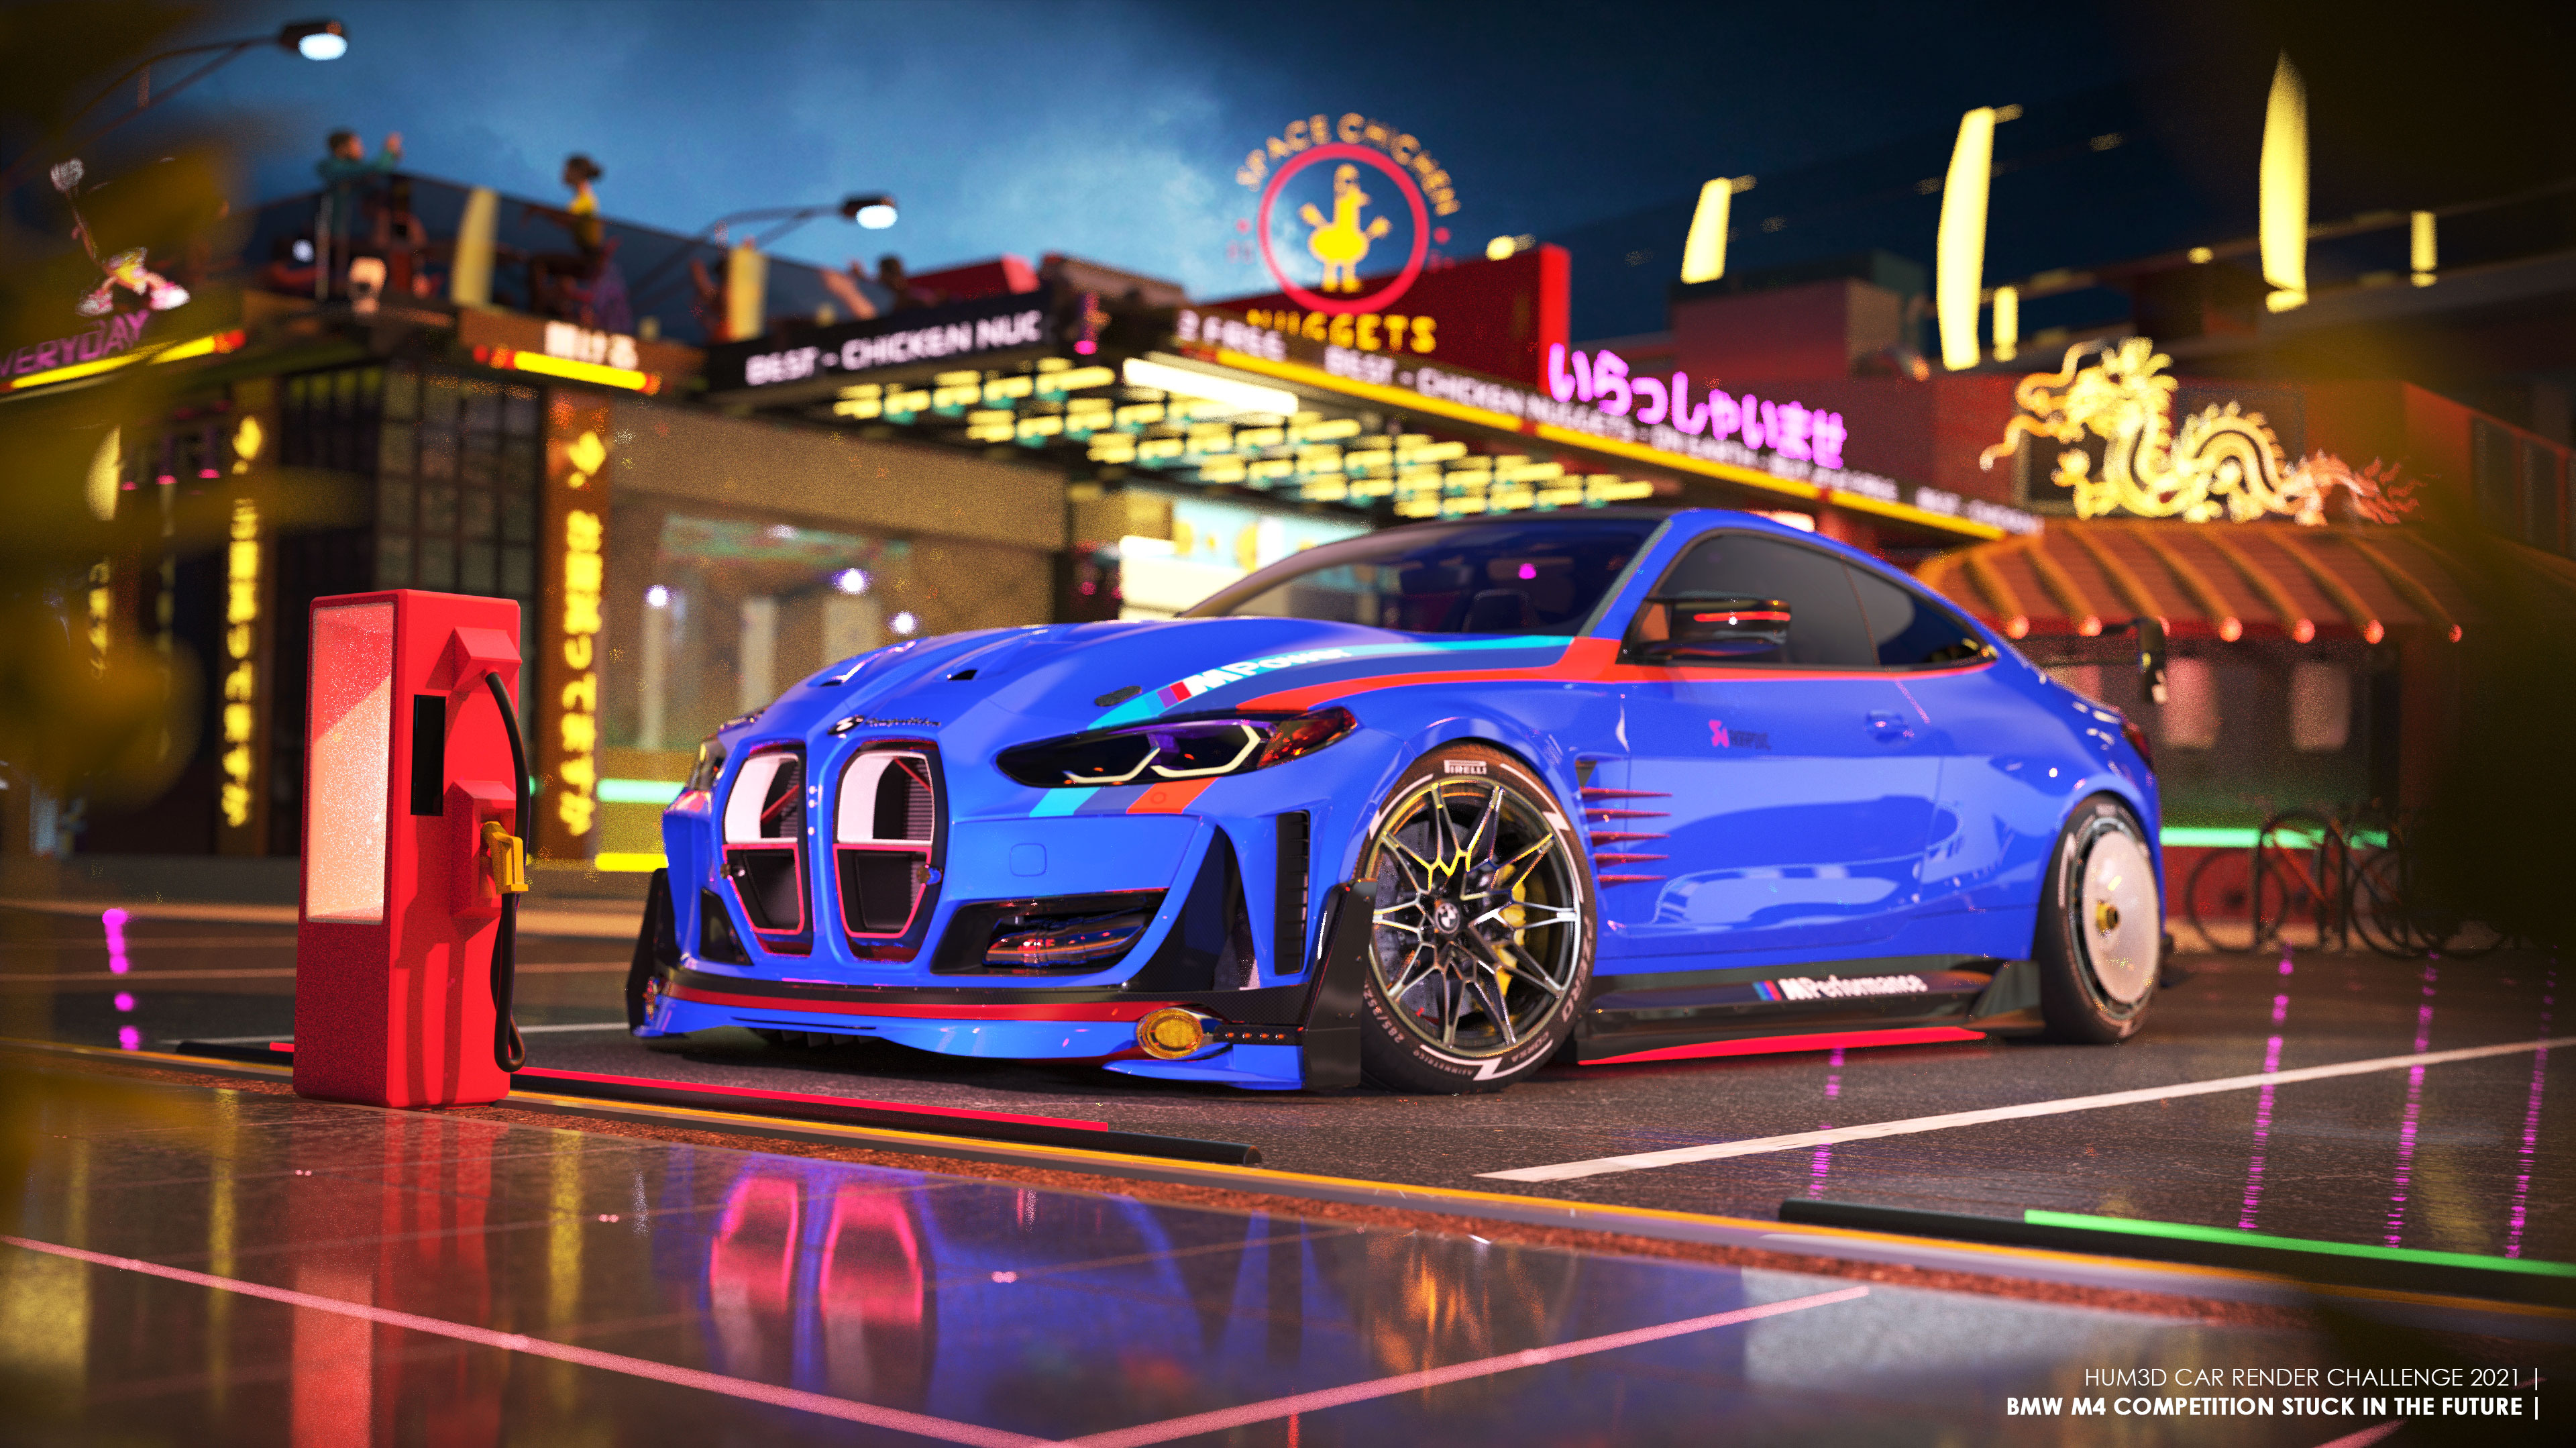 Car Render Challenge 2021 - BMW M4 Competition 2021 - Stuck in the future